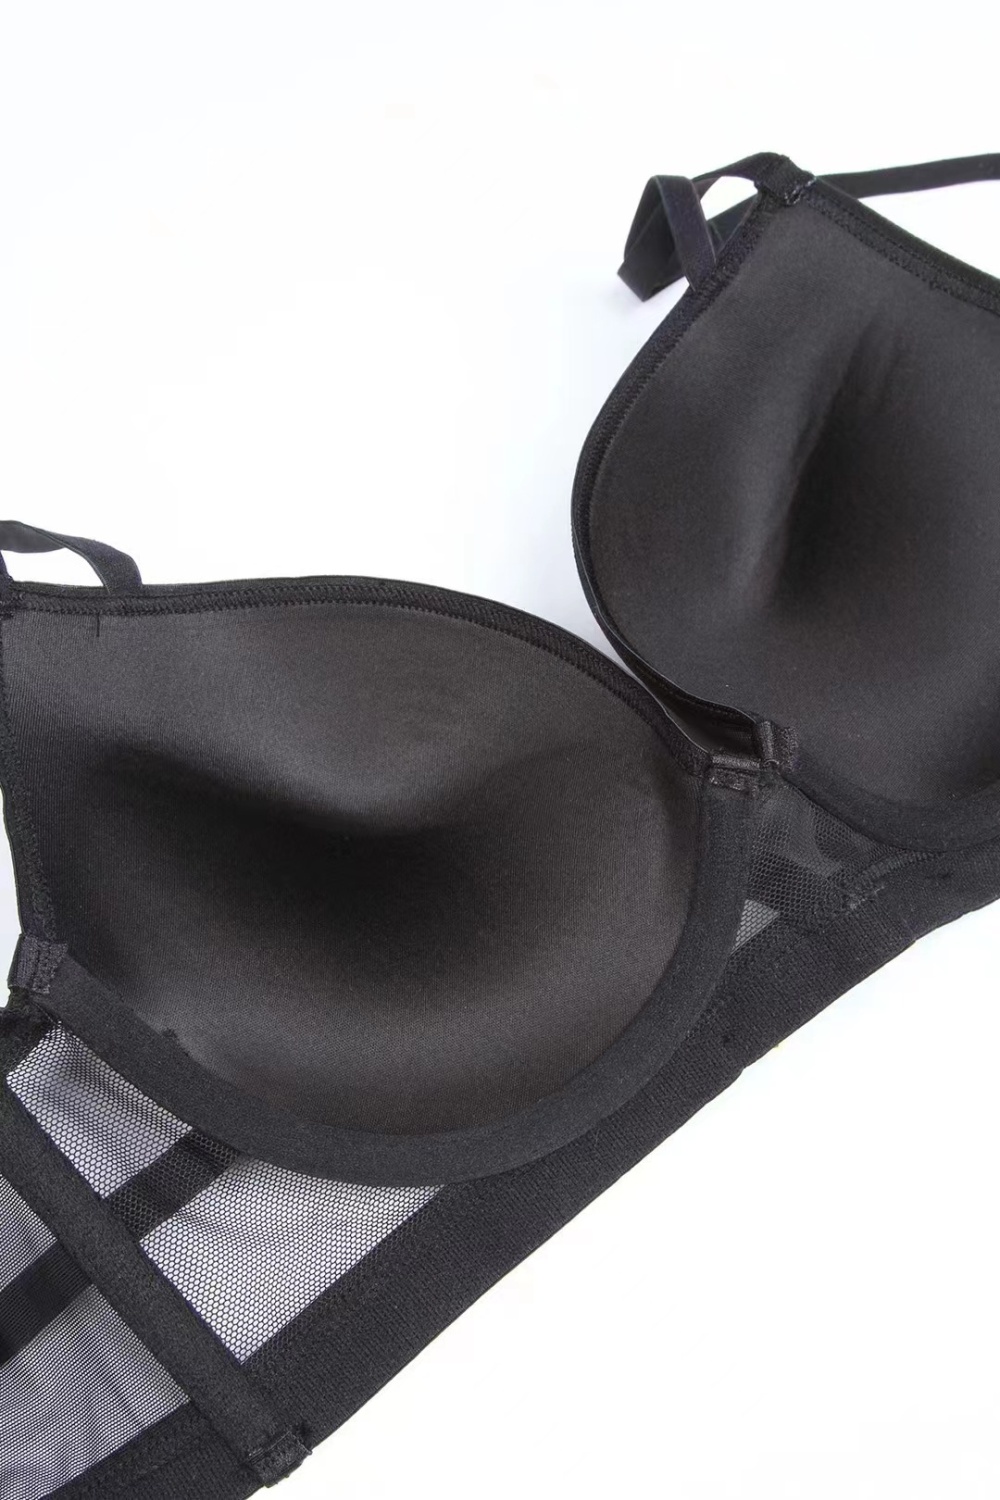 Steel care Bra small chest sexy Lingerie a set for women